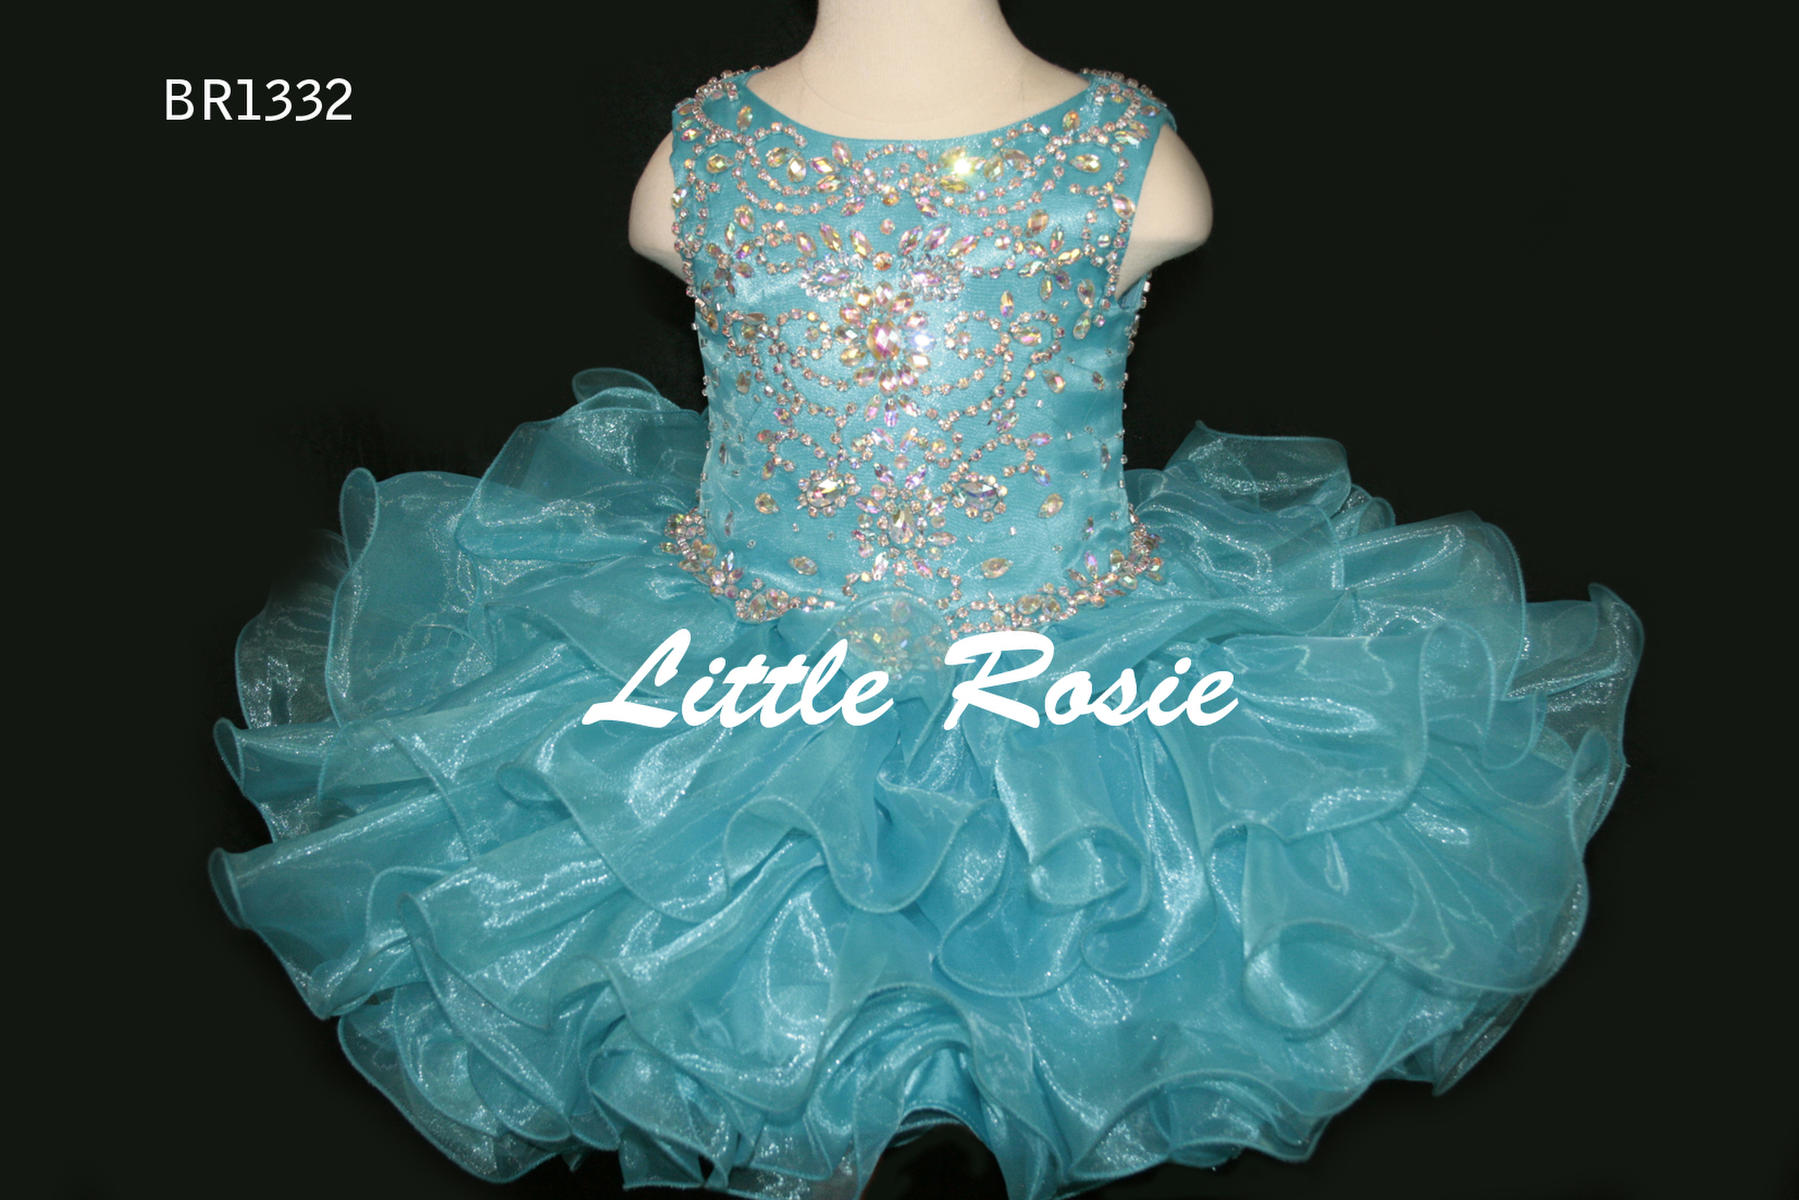 girl pageant dresses